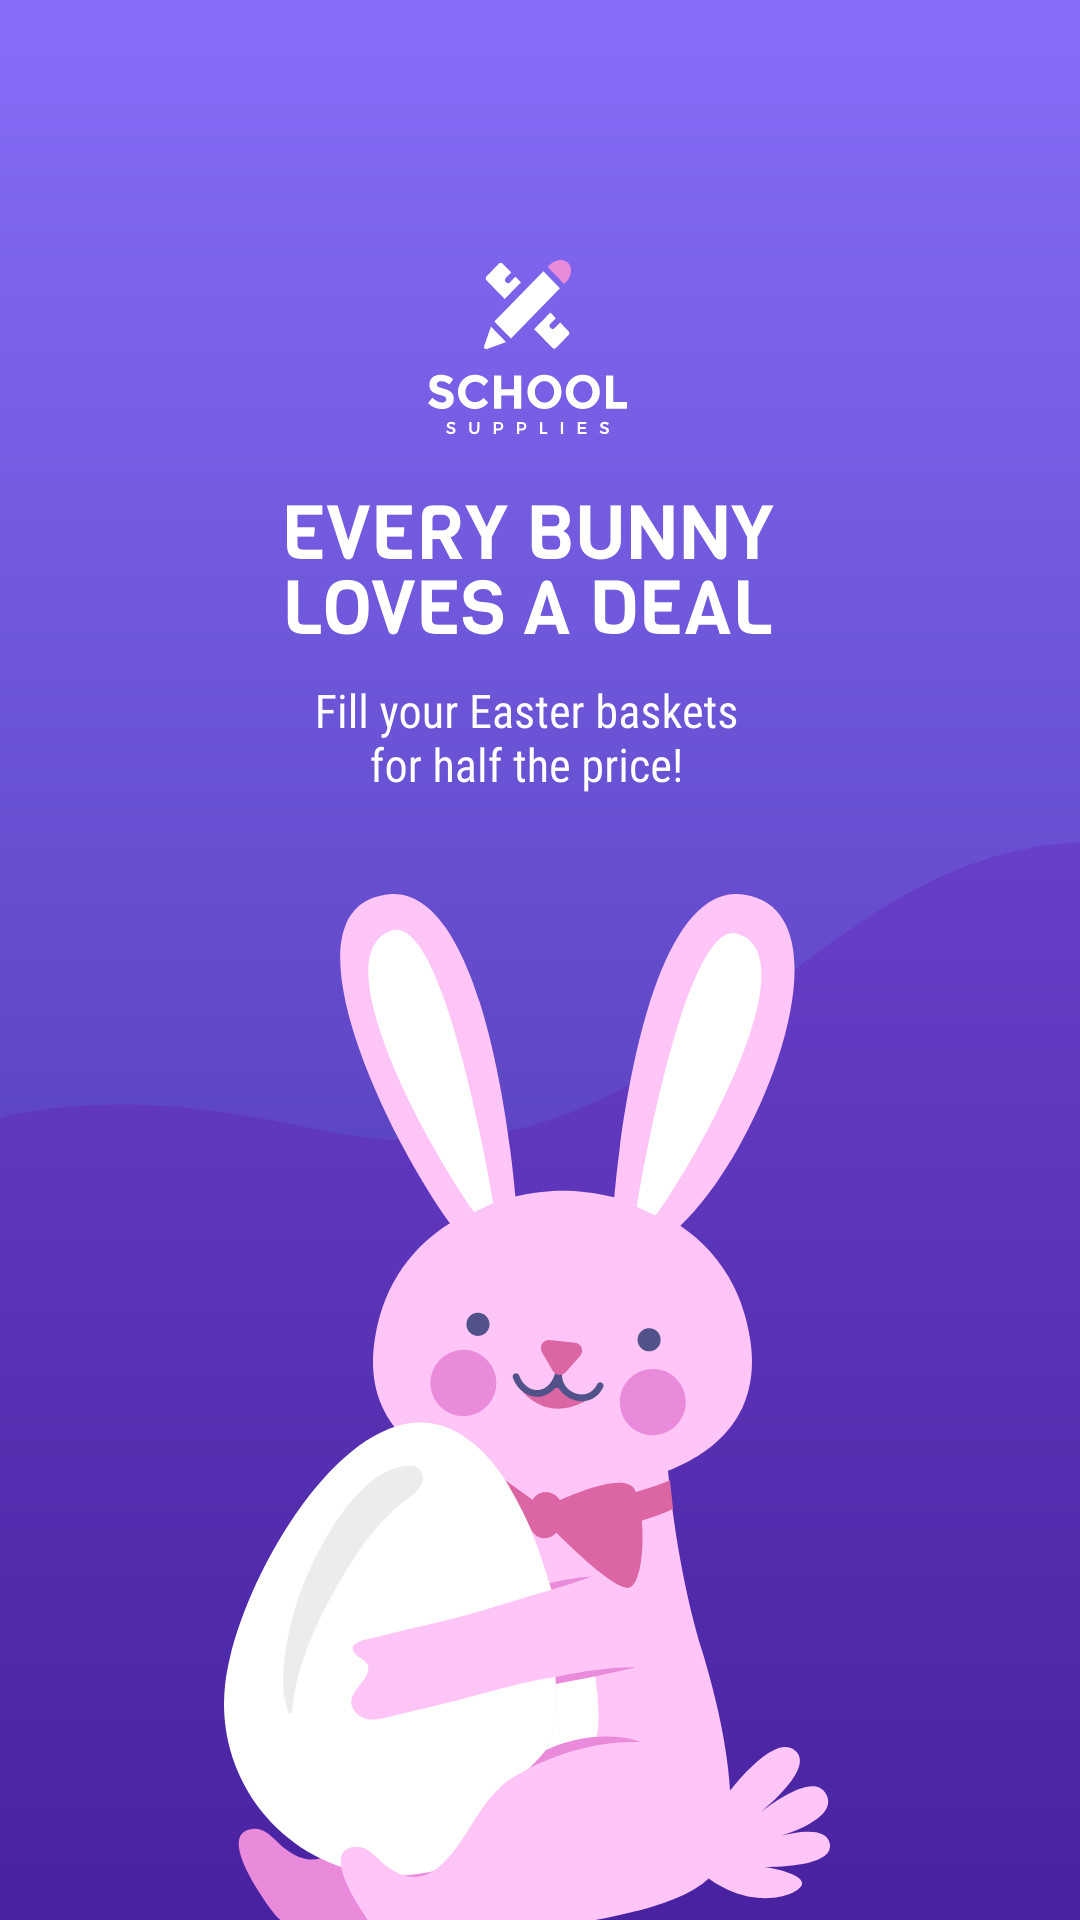 Every Bunny Loves Easter Deal